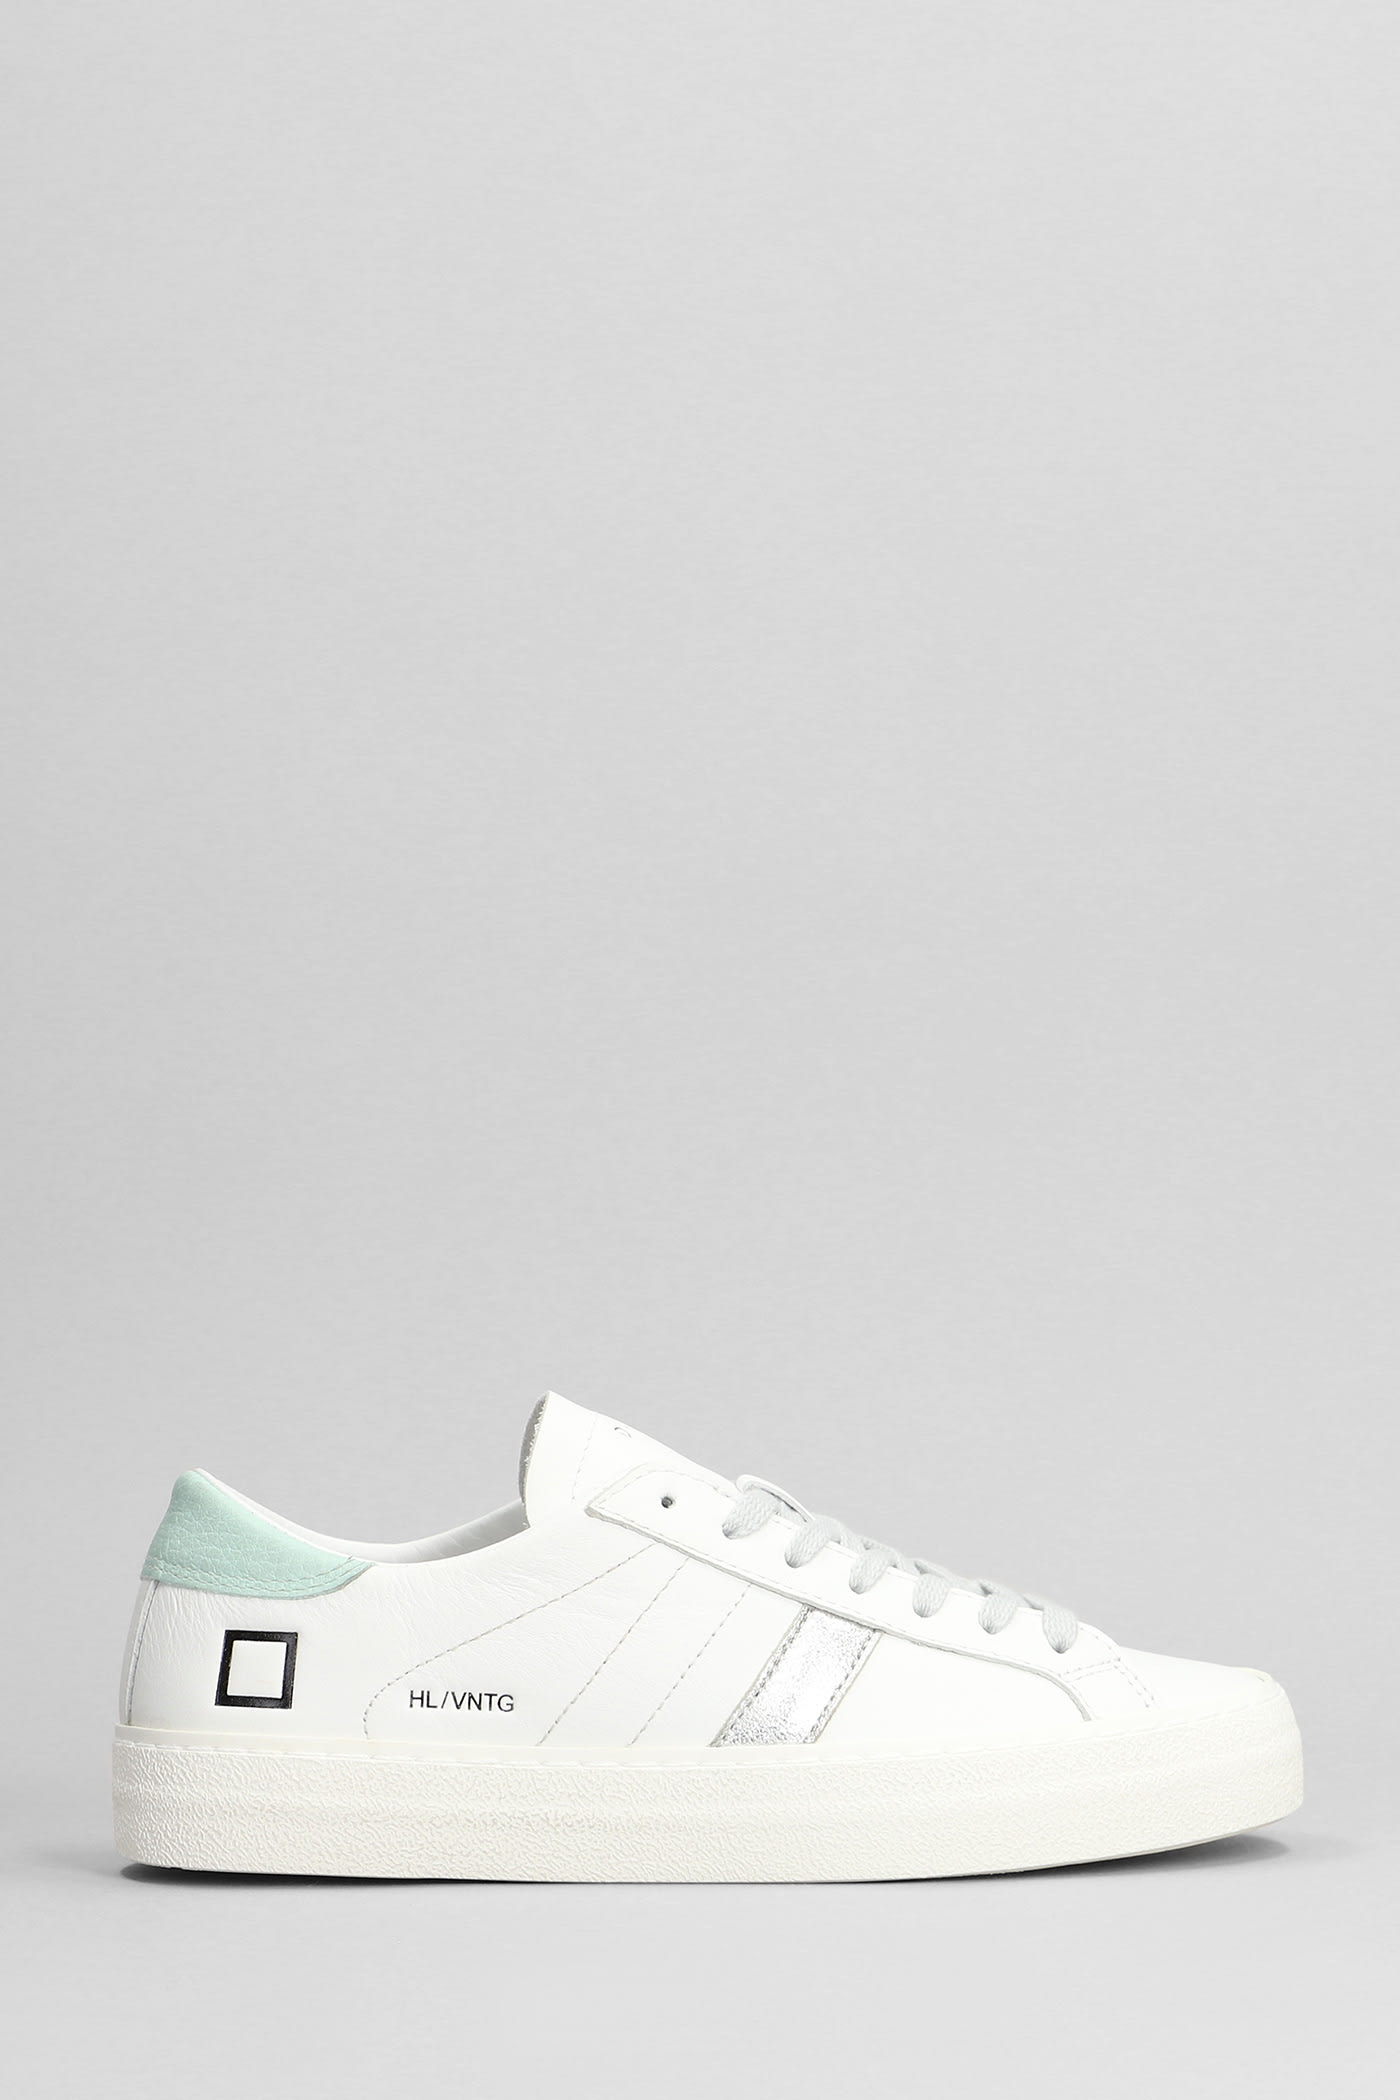 DATE HILL LOW SNEAKERS IN WHITE LEATHER